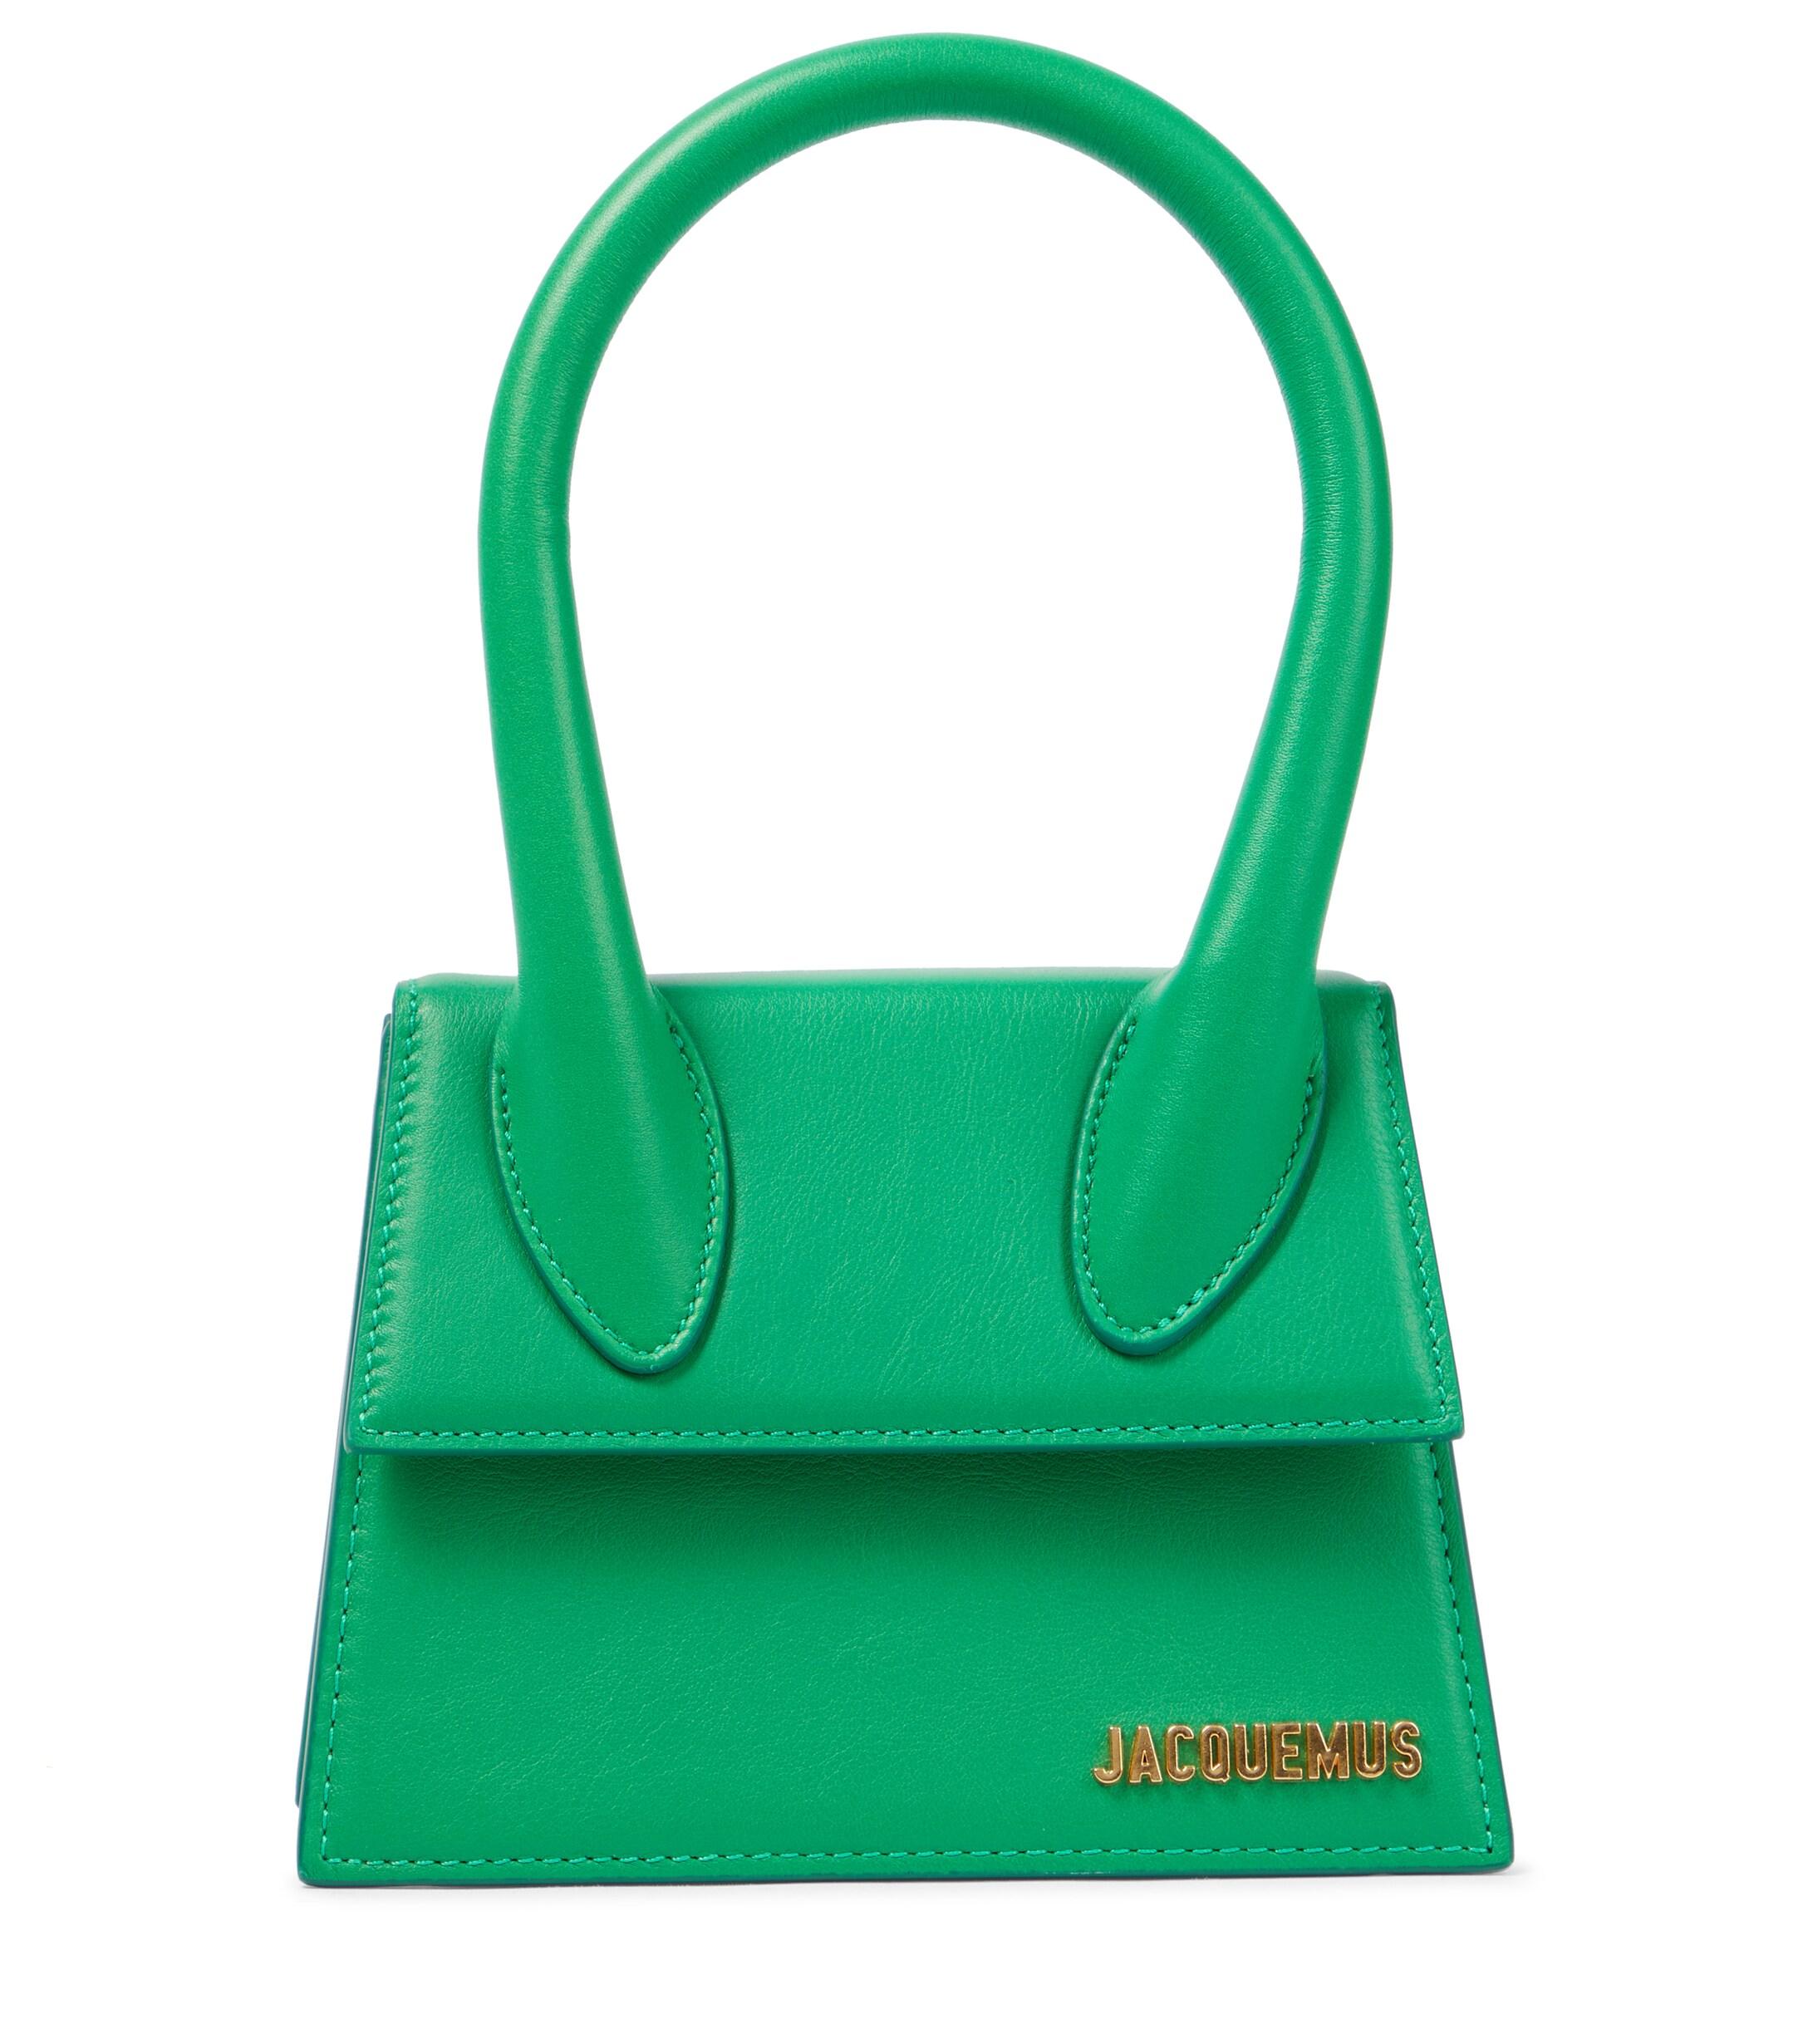 Jacquemus Le Chiquito Moyen Leather Tote in Green | Lyst Canada